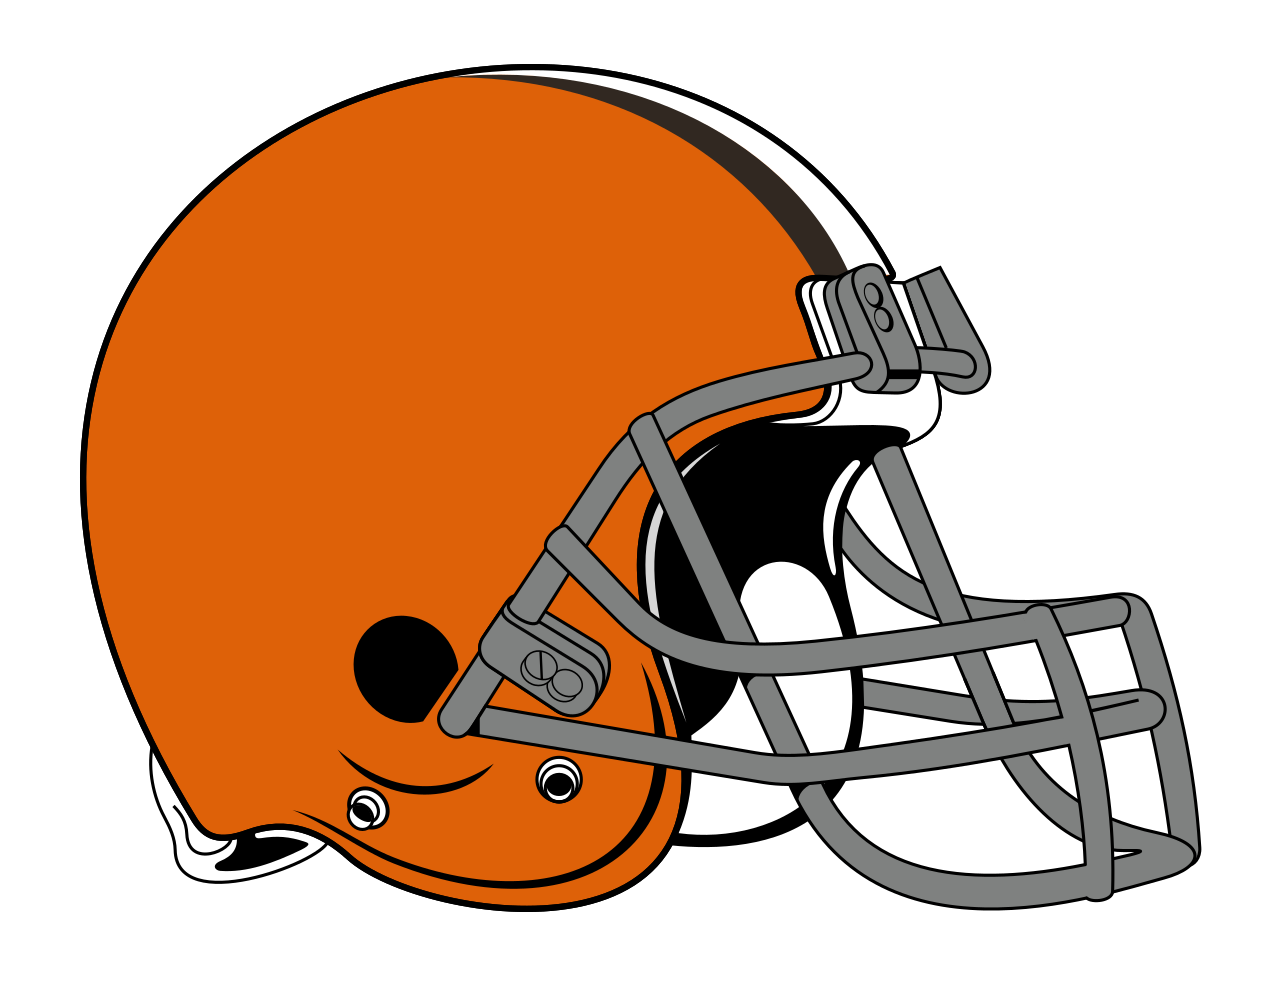 Logos and uniforms of the Cleveland Browns NFL Cincinnati